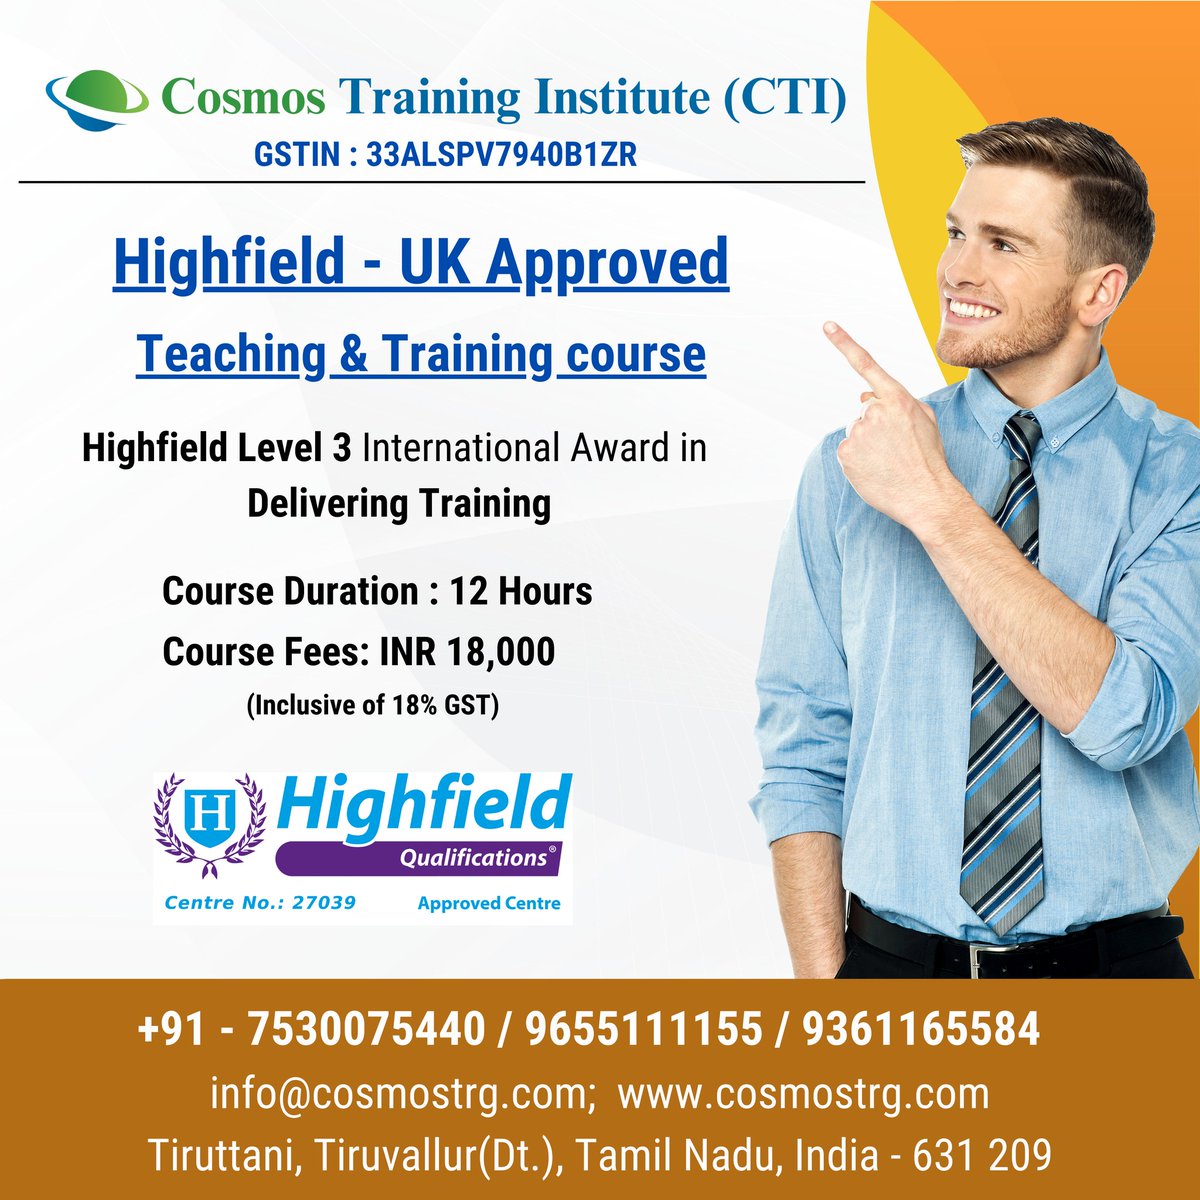 #deliveringtrainingcourse #riskassessment #RiskAssessmentTraining #riskmanagement #riskmanagementservices #riskmanagementtraining #riskassessmentcourse #HSE2023 #HSE #hsejobs #hsetraining #hseprofessionals #HSE_Manager #healthandsafetyjobs